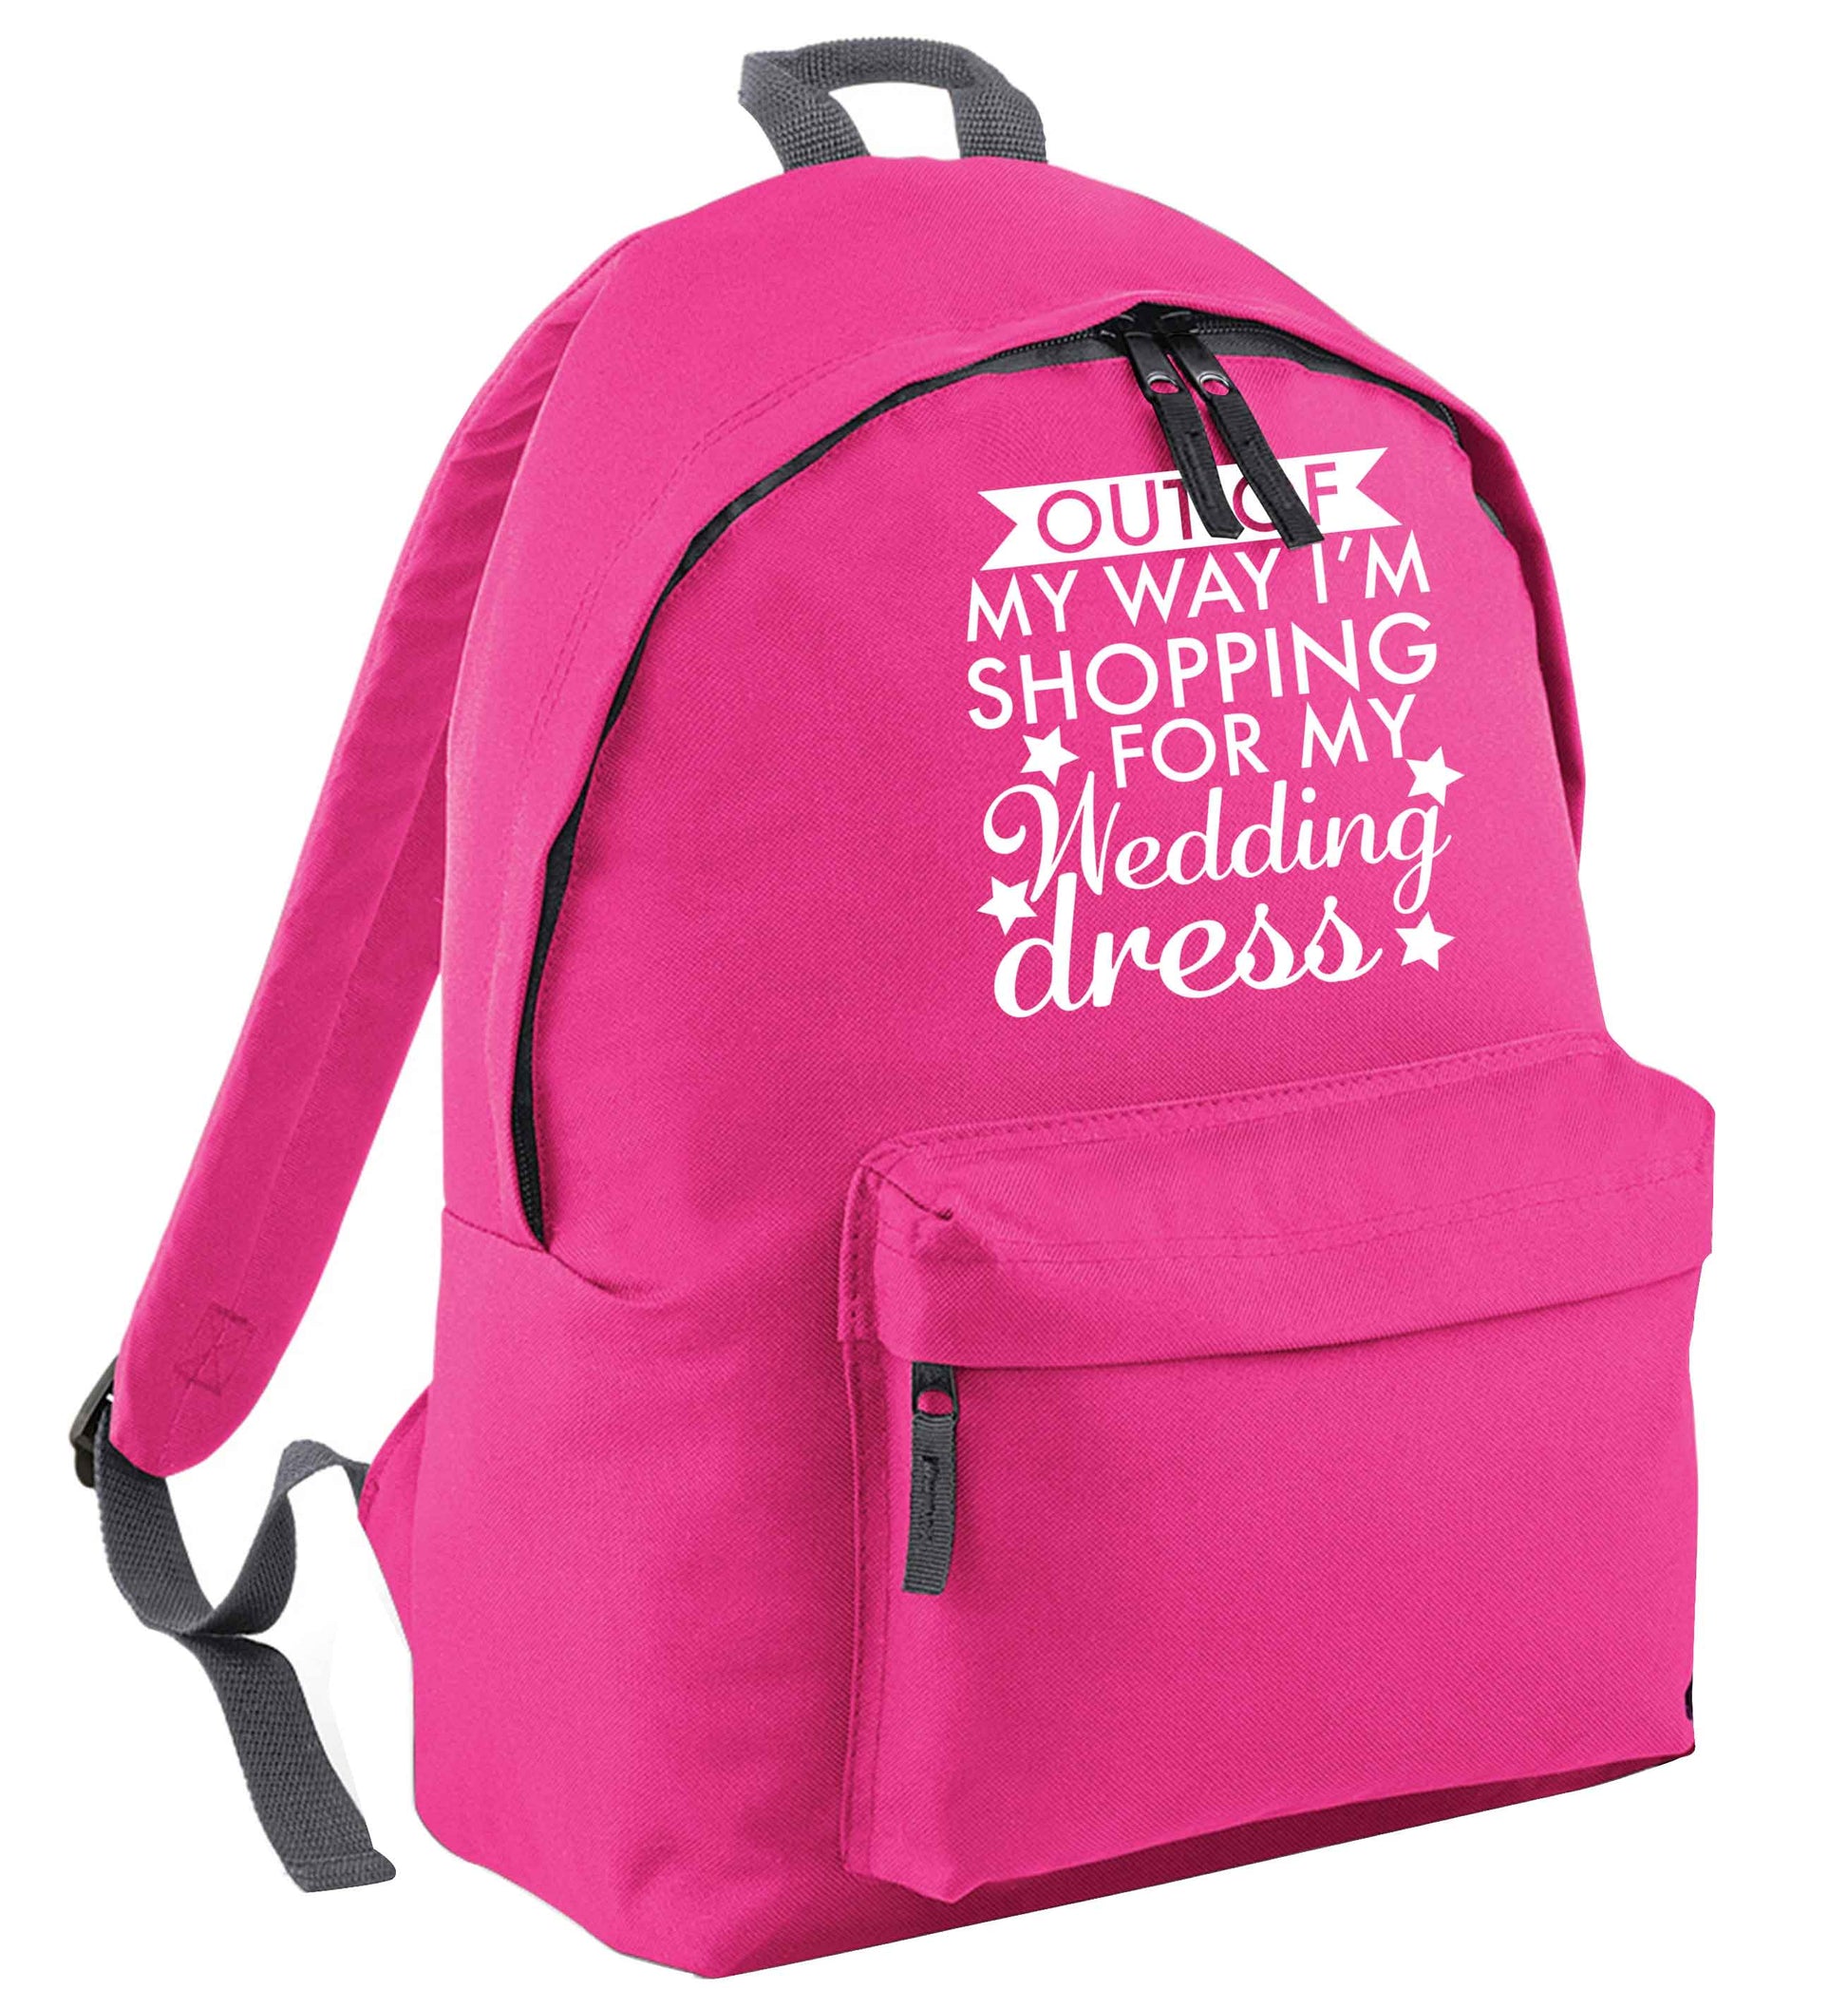 Out of my way I'm shopping for my wedding dress pink adults backpack